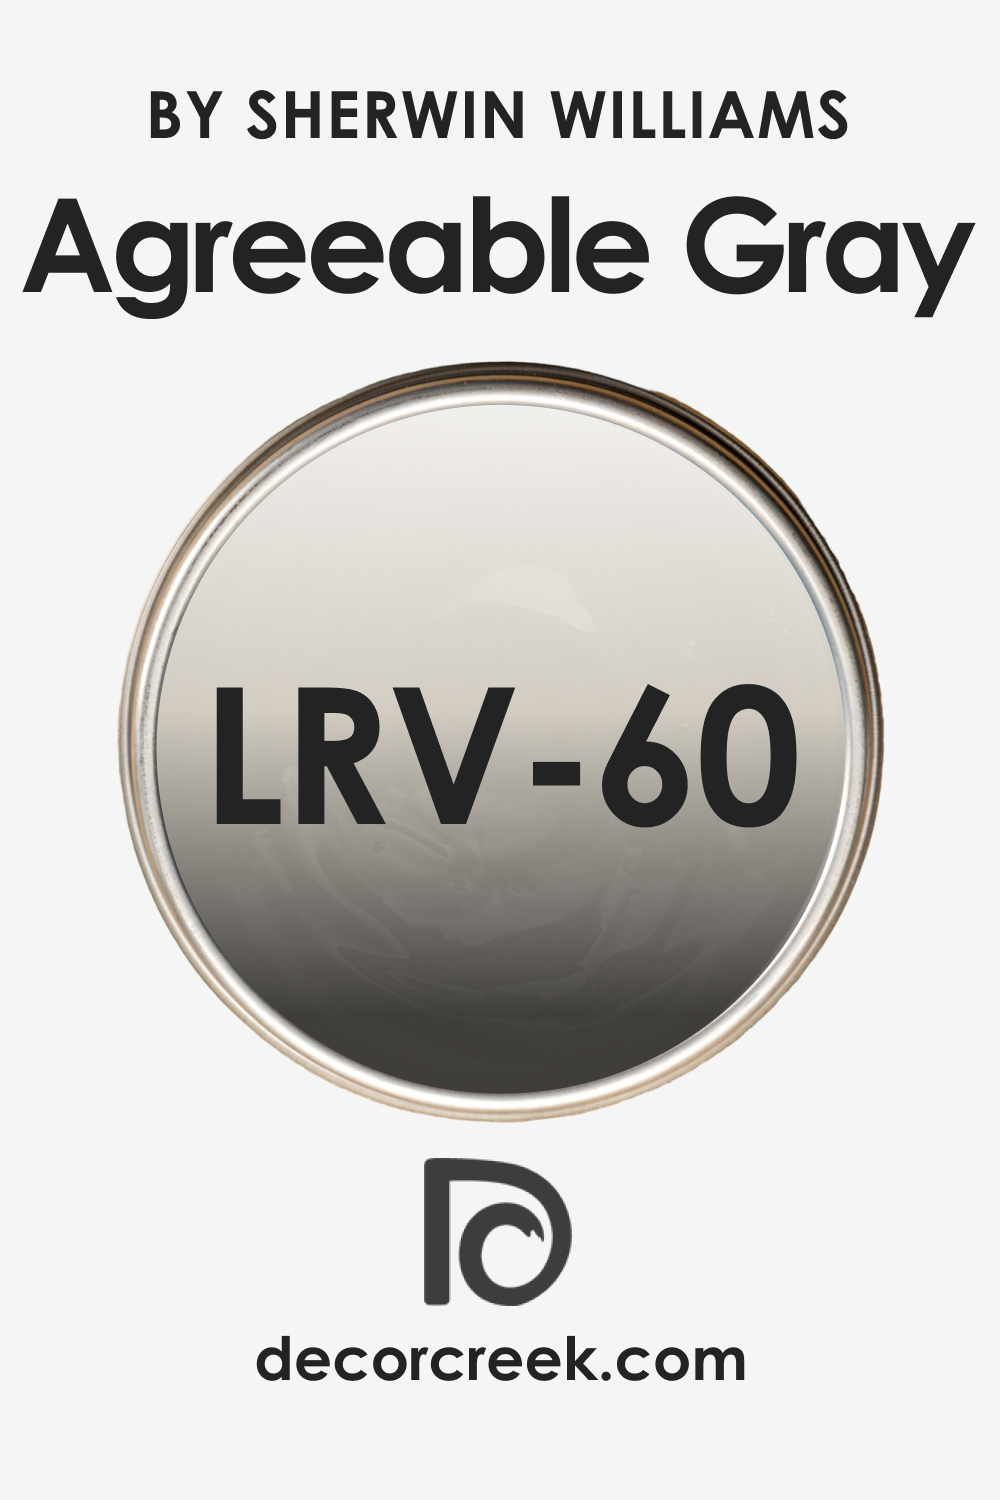 LRV of SW 7029 Agreeable Gray